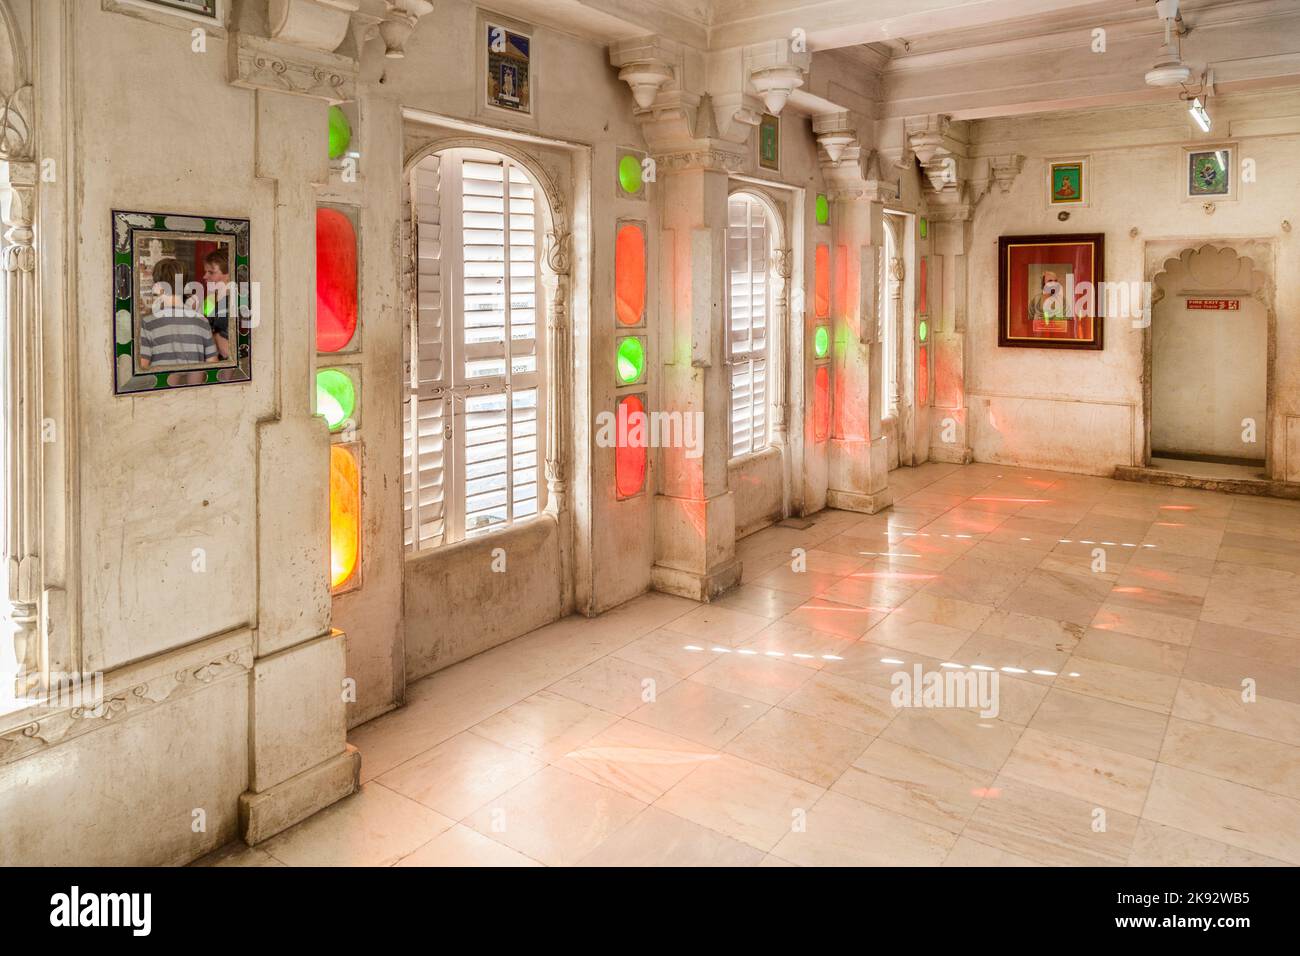 UDAIPUR, INDIA - OCT 21, 2012: inside the City Palace in Udaipur, India. The foundation of the fort was laid in 1559  by Udai Singh. The palace belong Stock Photo